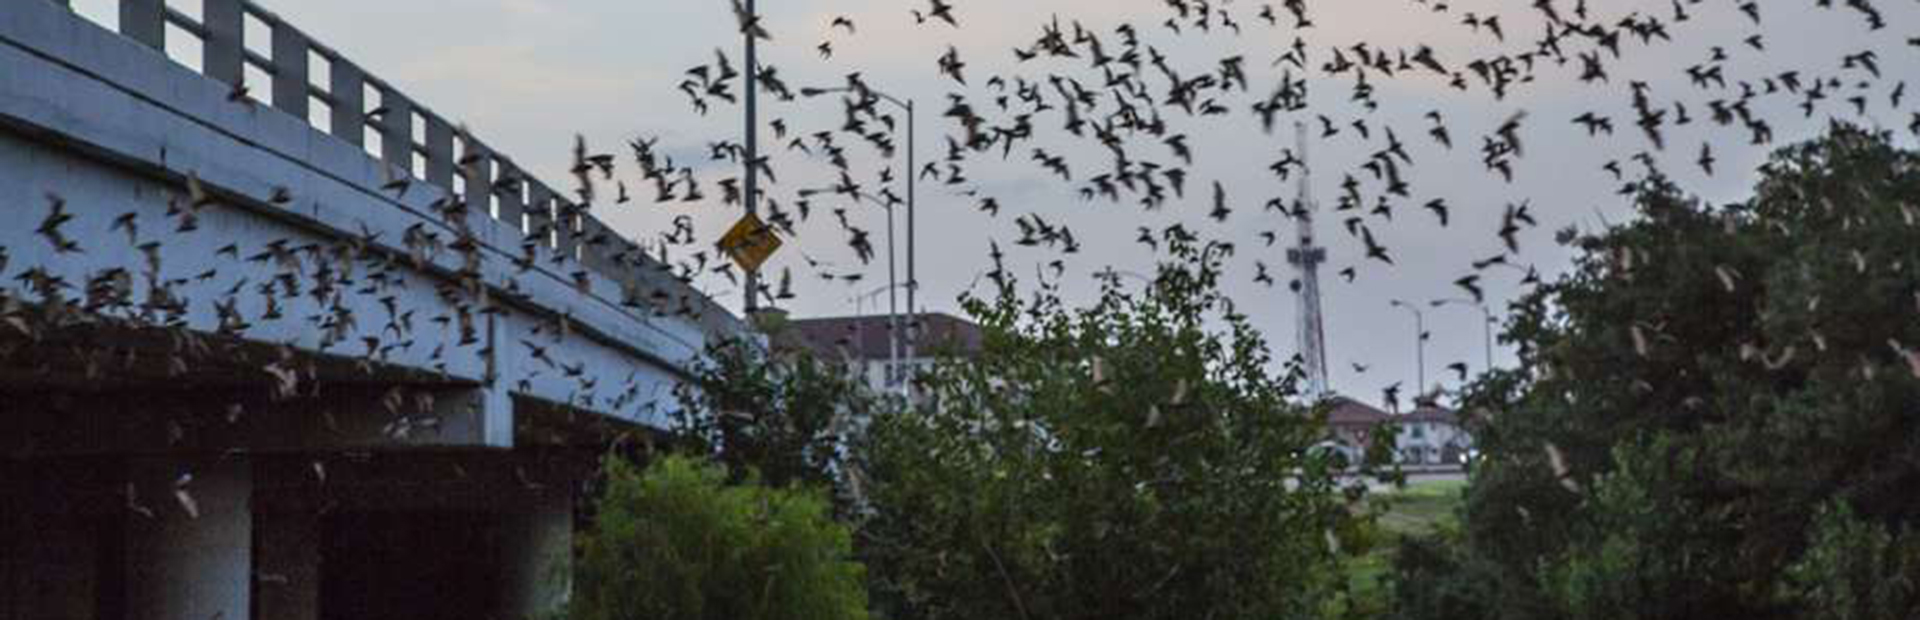 Waugh Drive Bridge with Mexican free-tailed bats